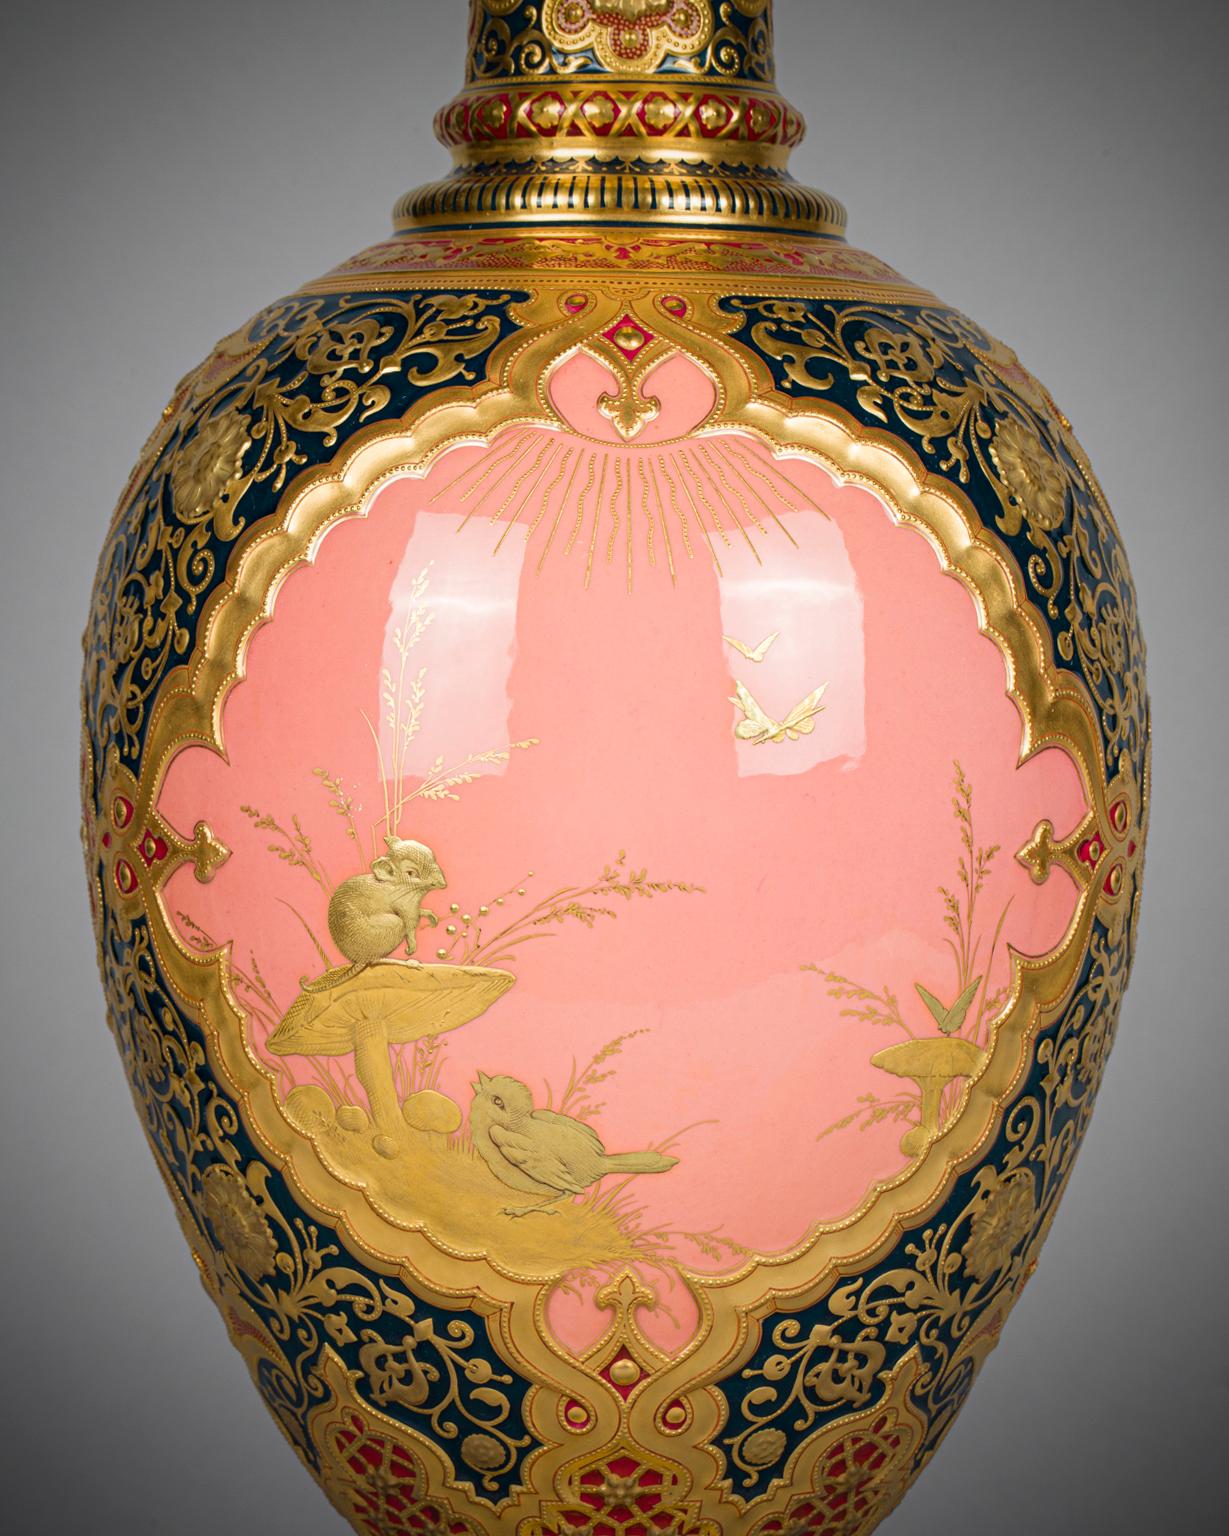 Porcelain Royal Crown Derby Covered Urn, 19th Century For Sale